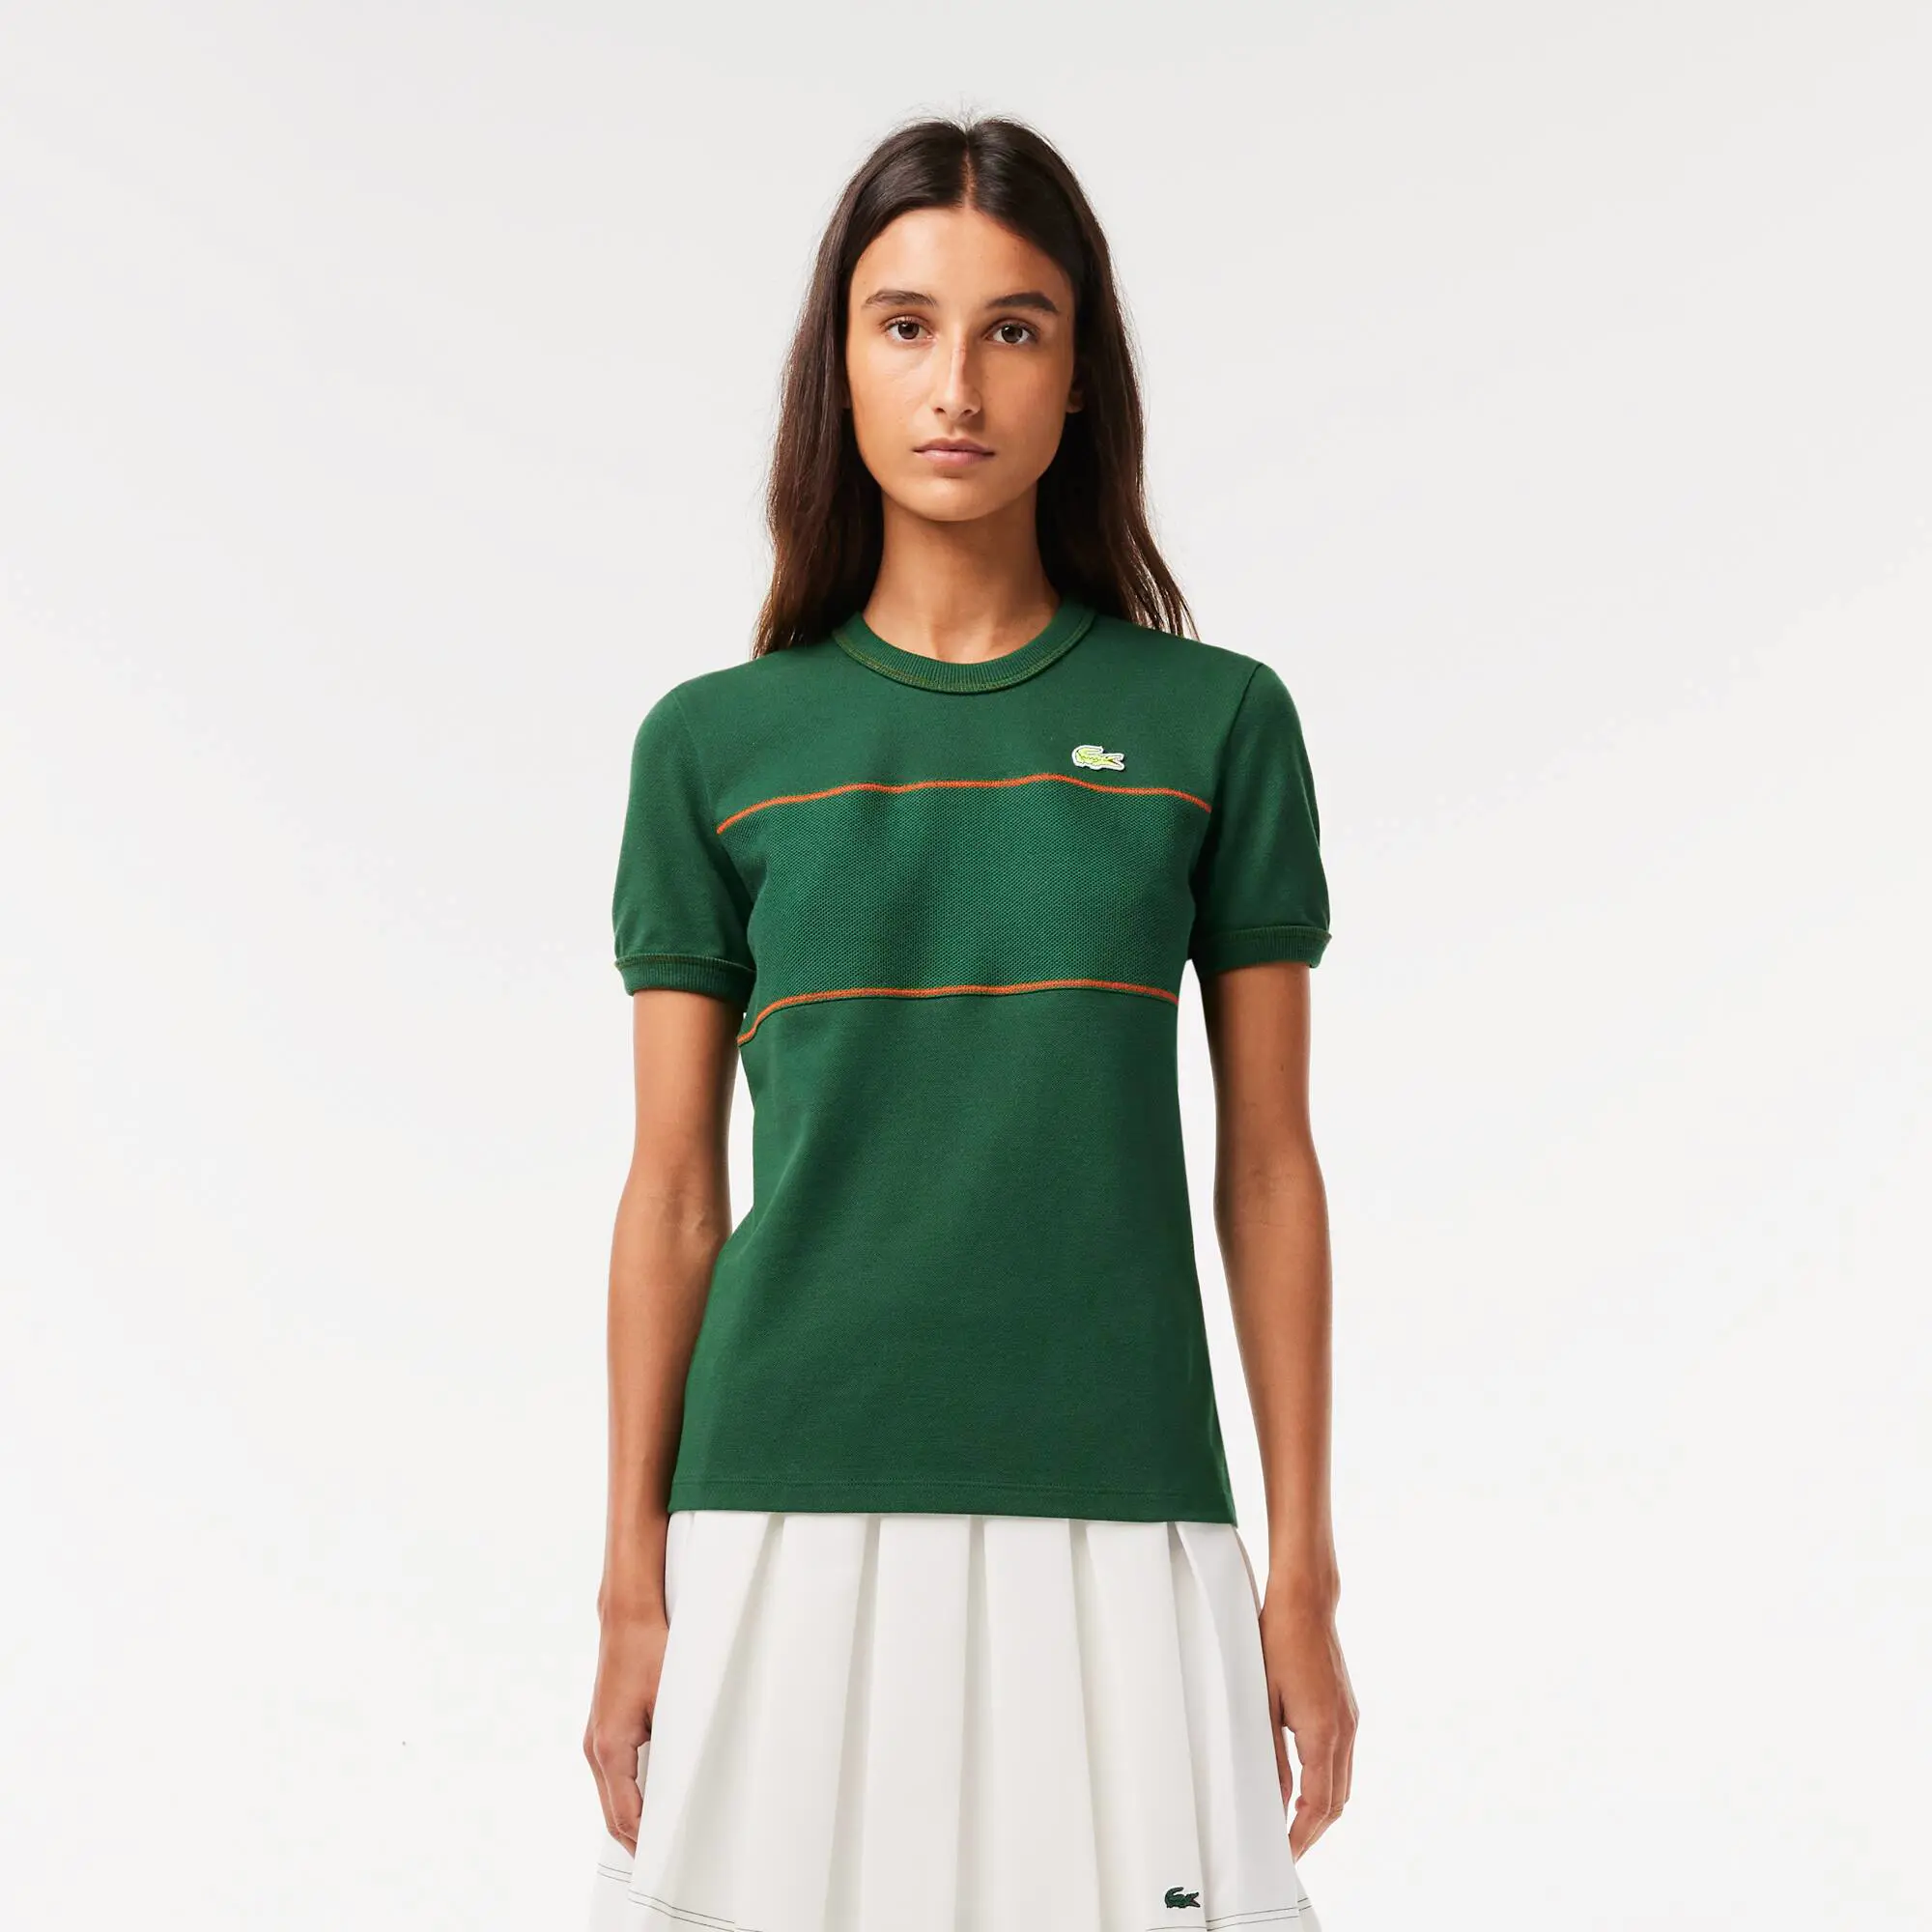 Lacoste Women’s Round Neck French Made Organic Cotton Piqué T-shirt. 1